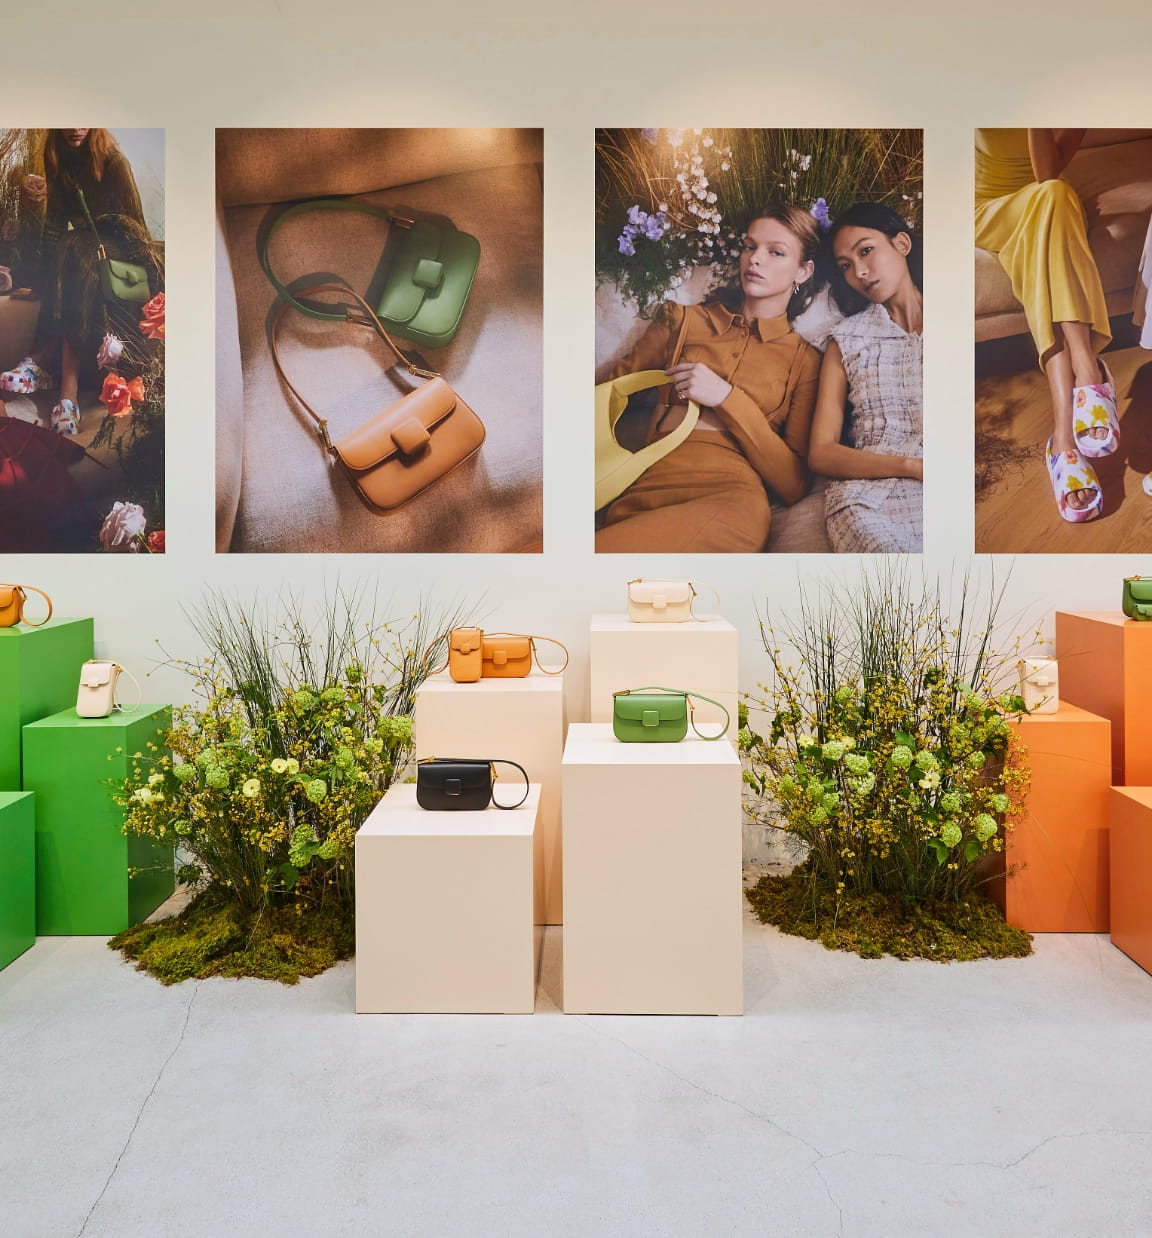 Product display at CHARLES & KEITH’s ‘Blooming Spring’ launch event in Seoul, Korea